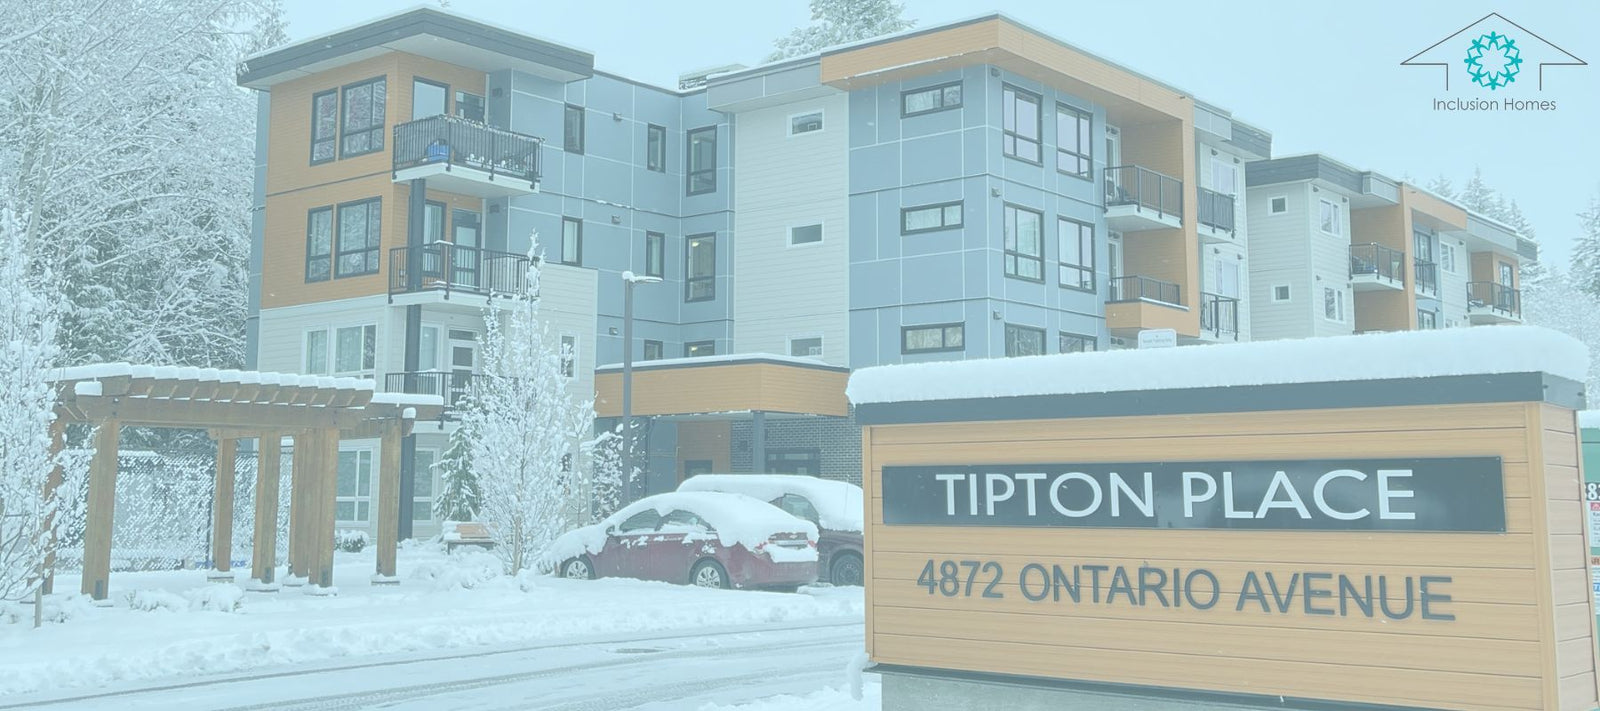 External image of Tipton Place apartment building - Inclusive Housing - inclusion powell river